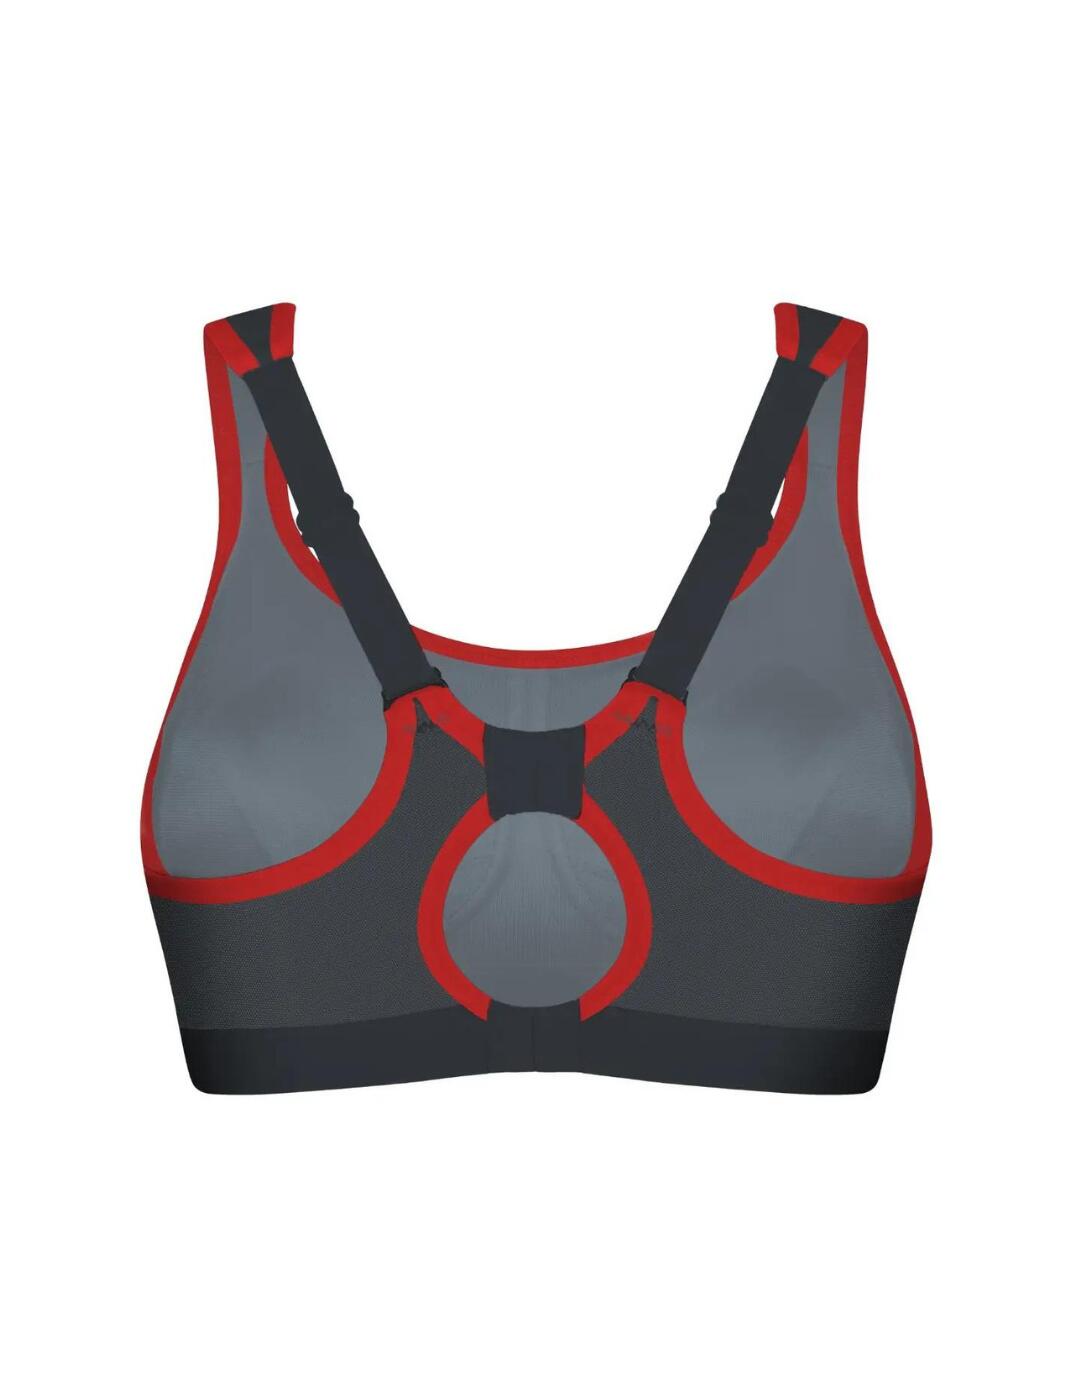 Shock Absorber High Impact Sports Bra S4490 Non Wired Gym Workout Run Bra